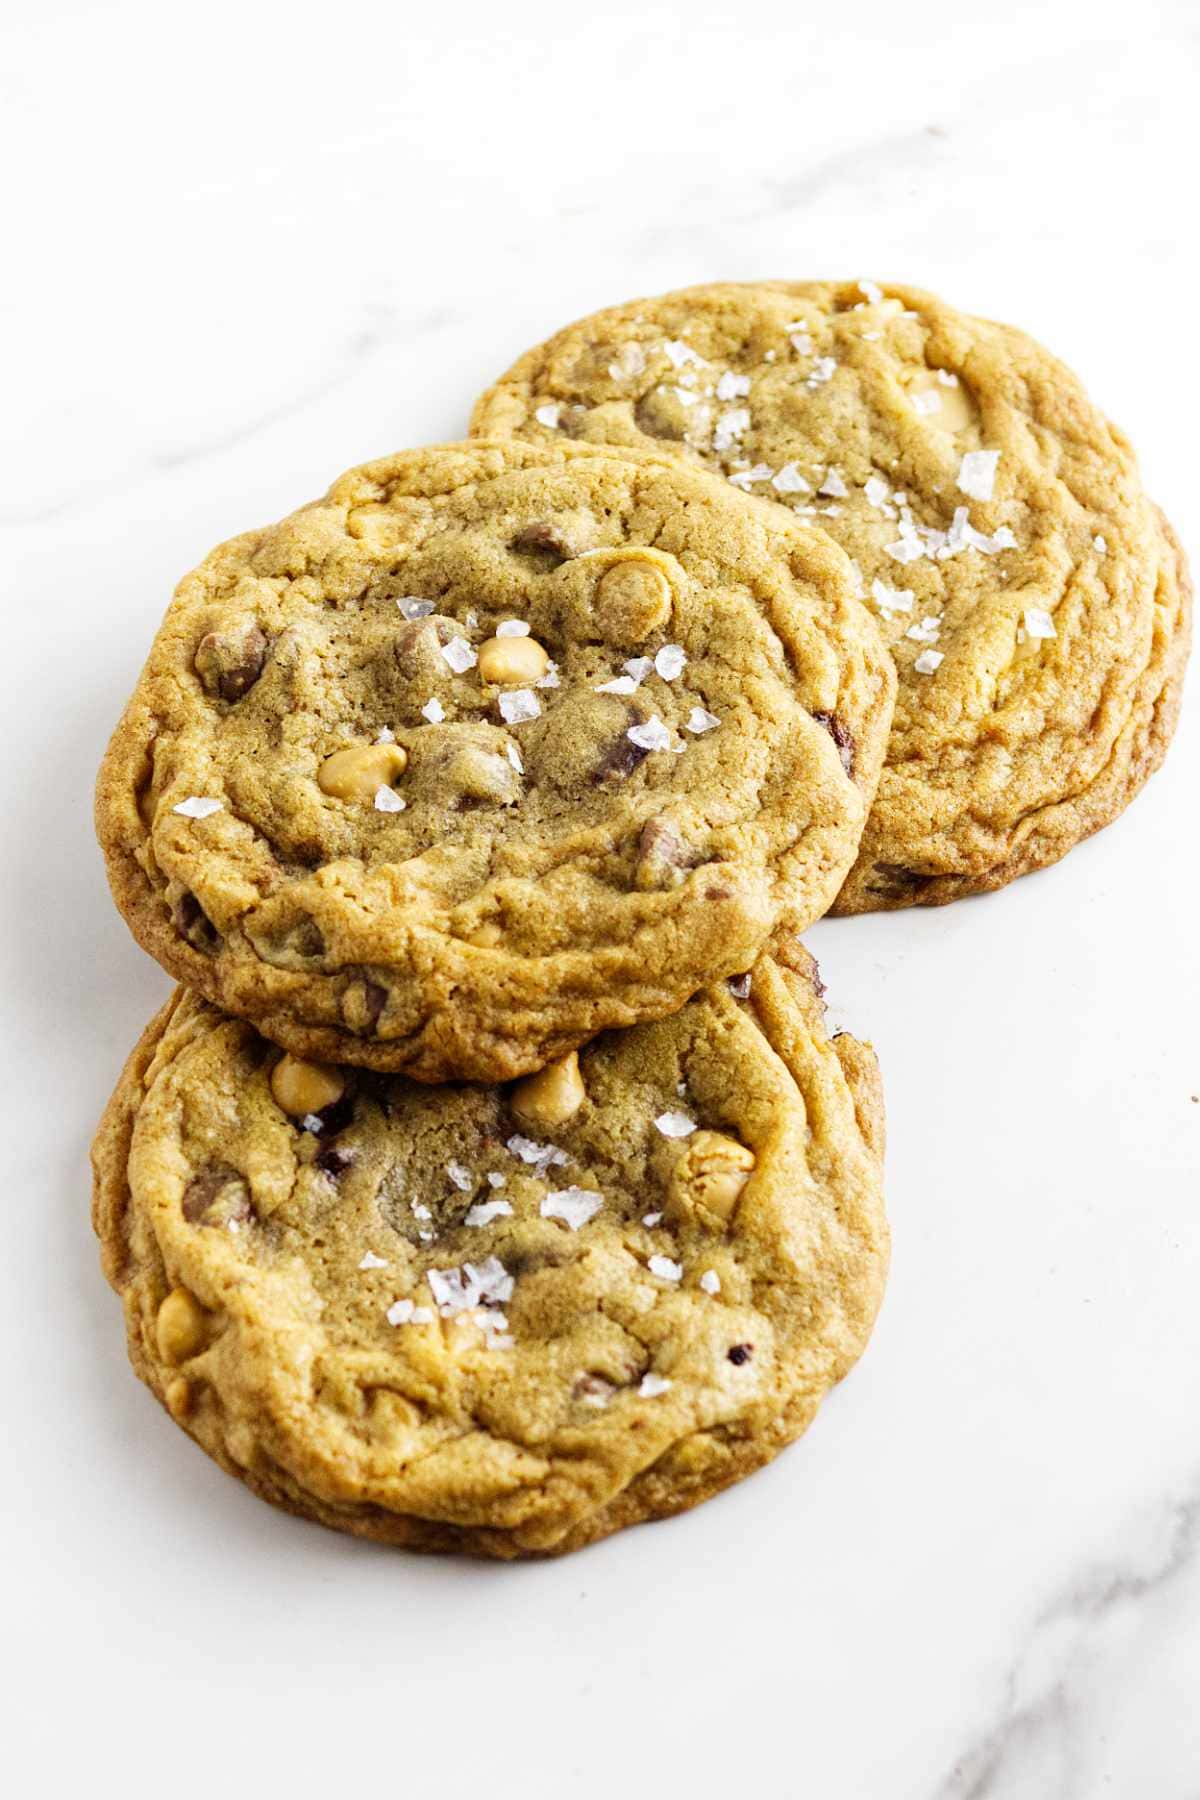 three chocolate chip butterscotch cookies with salt flakes on top.